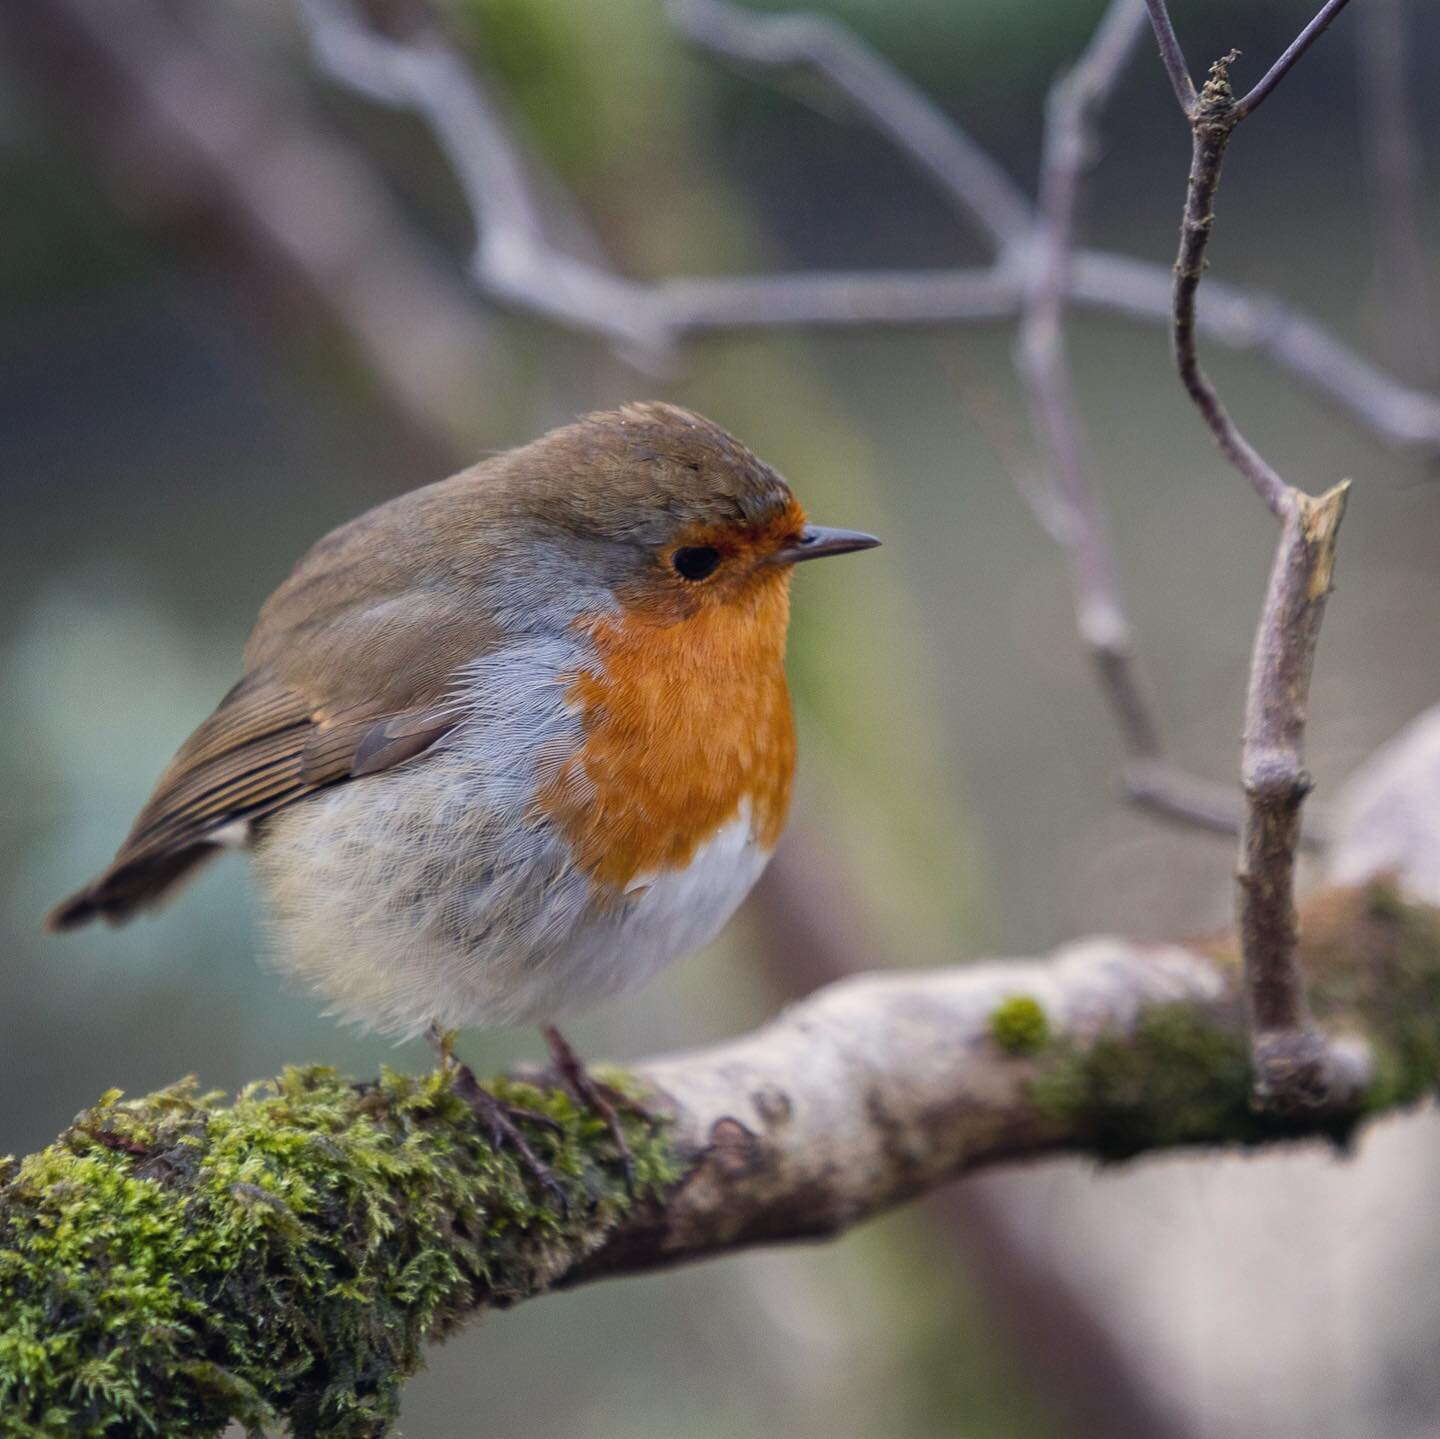 This guy was a right little poser this afternoon! 📸

&ldquo;A robin bird meaning is hope, renewal, and rebirth. It symbolises new beginnings, new projects, and a sign of good things to come.&rdquo;